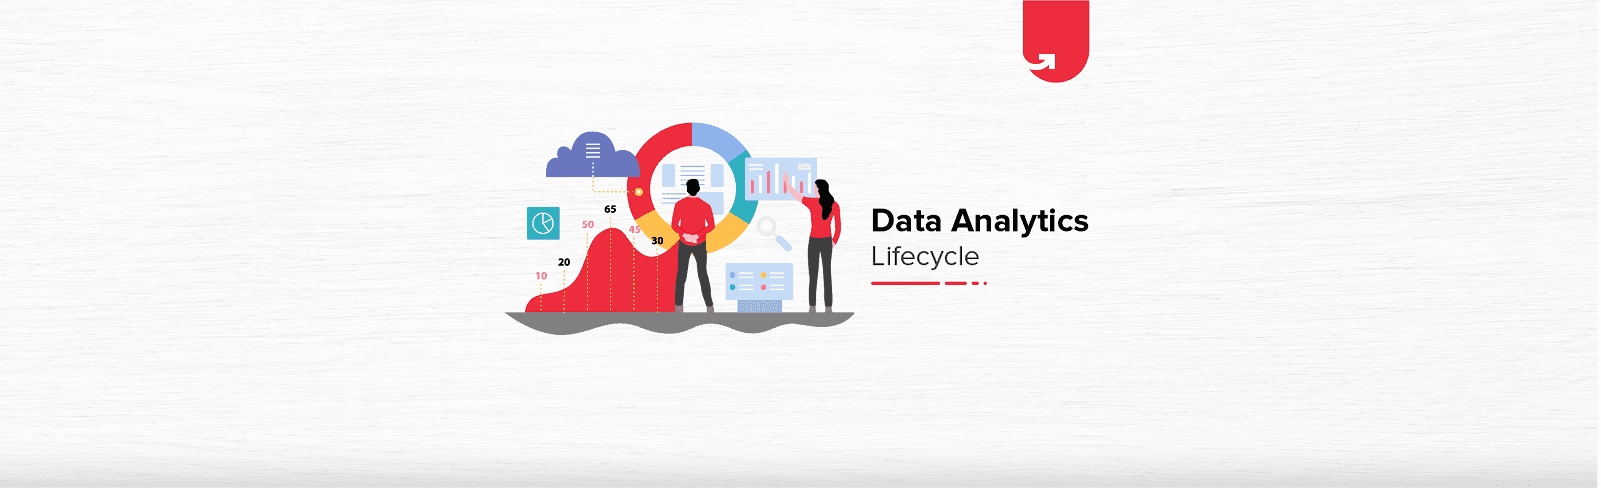 6 Phases of Data Analytics Lifecycle Every Data Analyst Should Know About